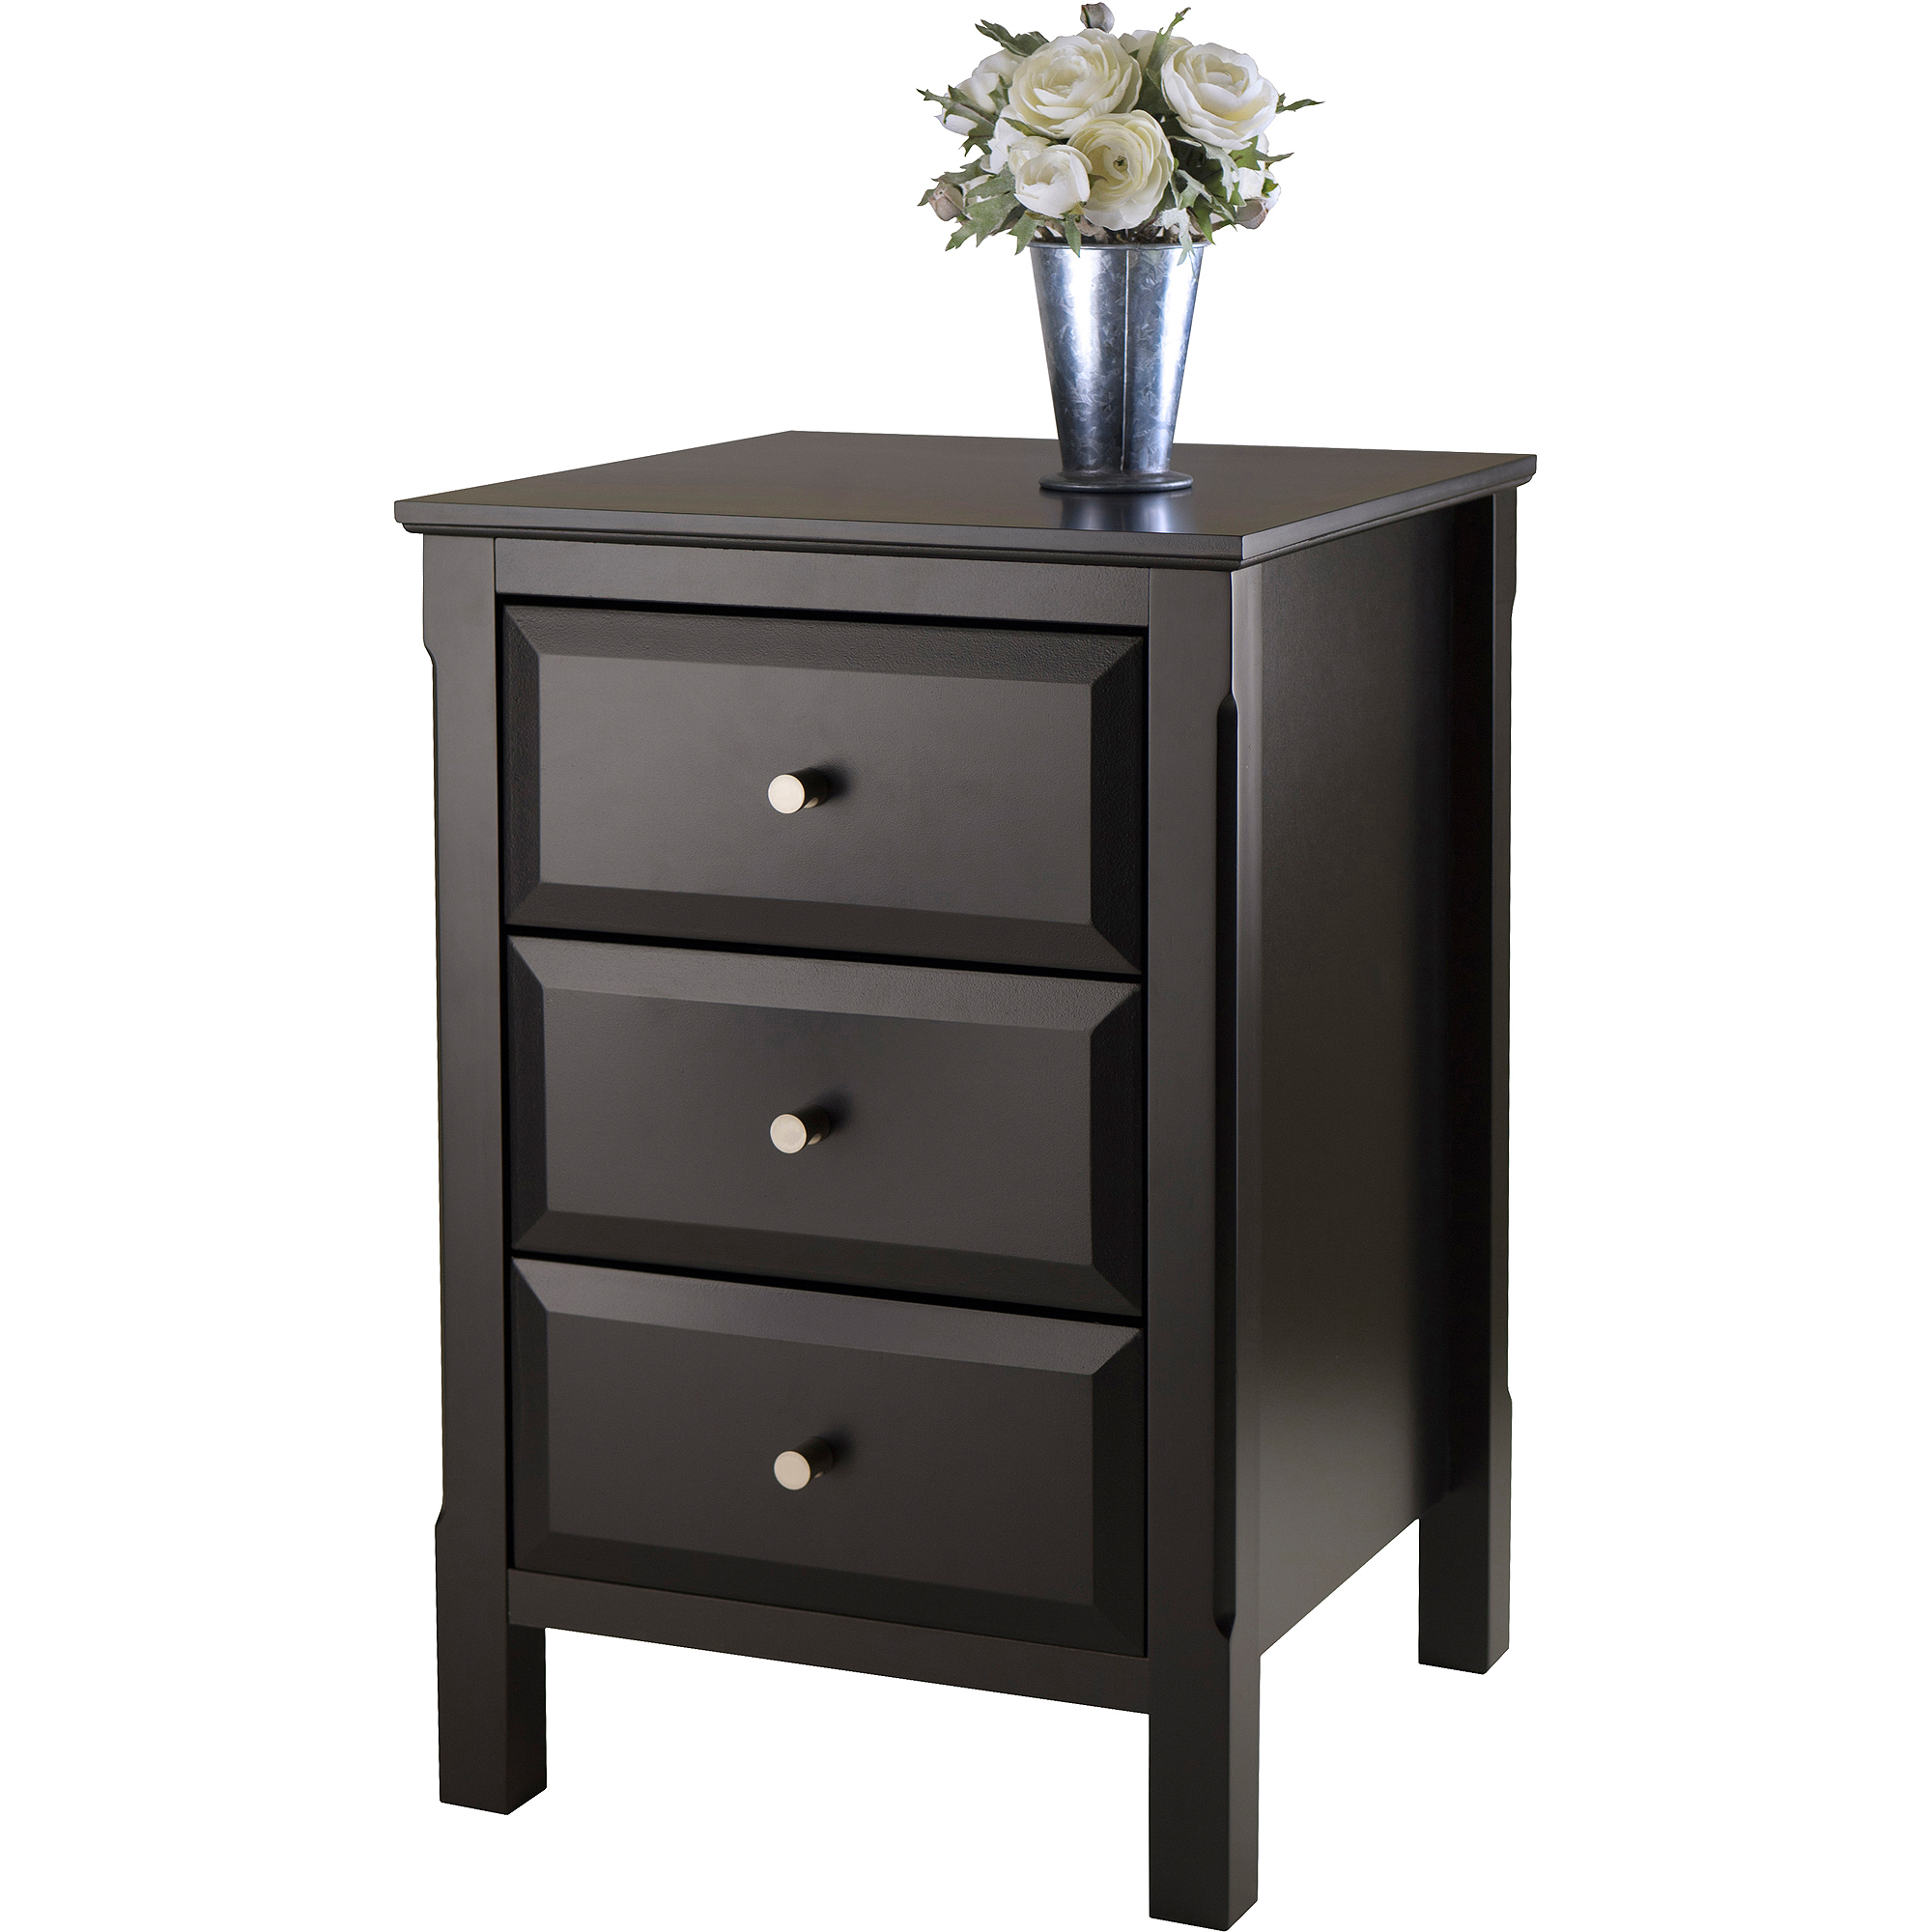 Winsome Timmy Nightstand, Black Finish - image 1 of 4